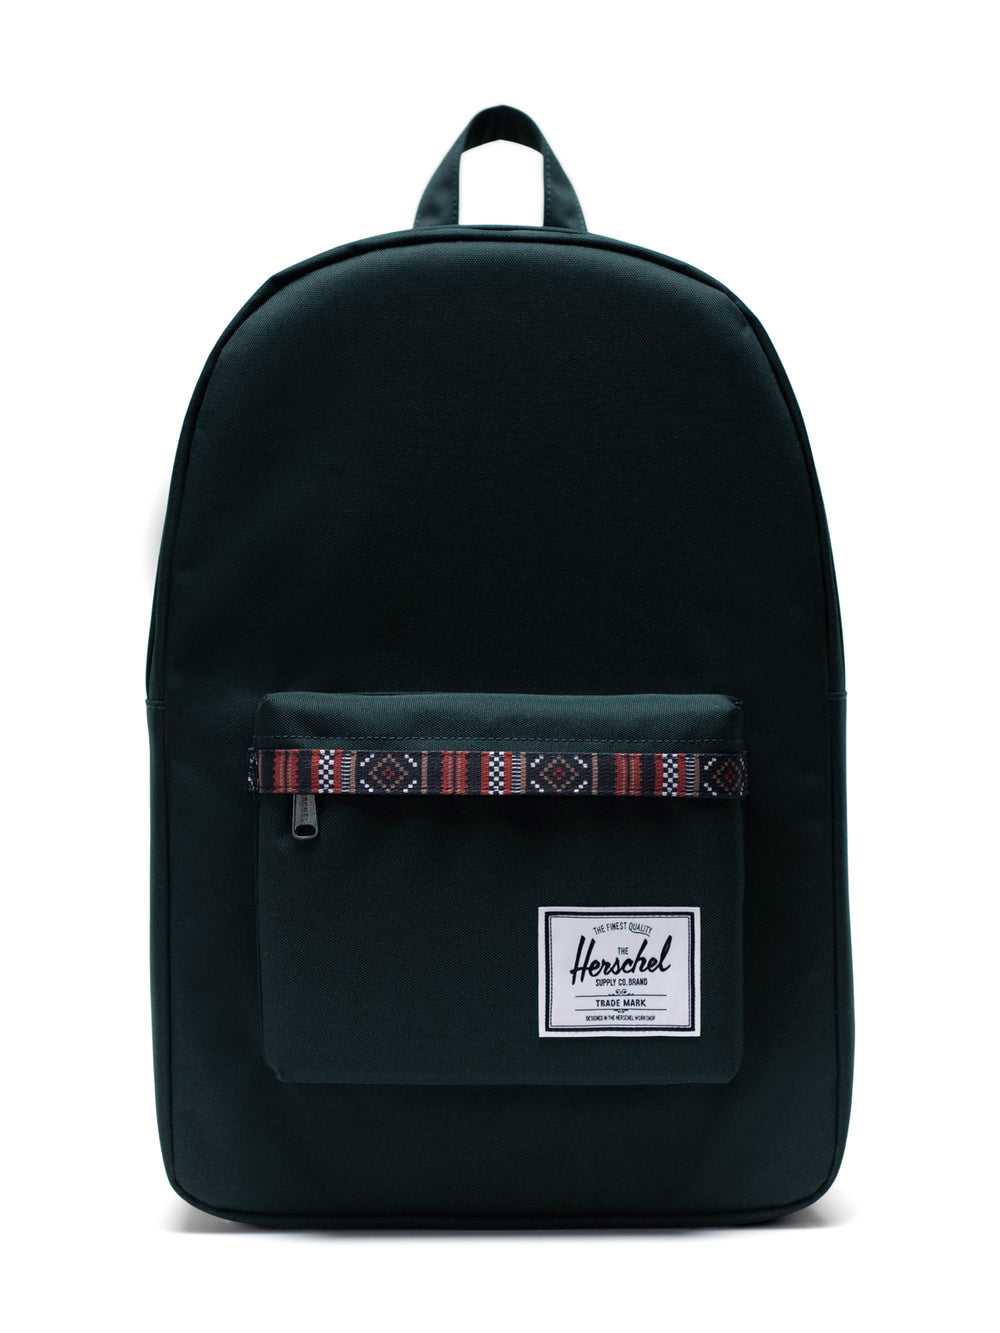 HERSCHEL SUPPLY CO. MIDWAY SOUTHWEST 25L BACKPACK  - CLEARANCE